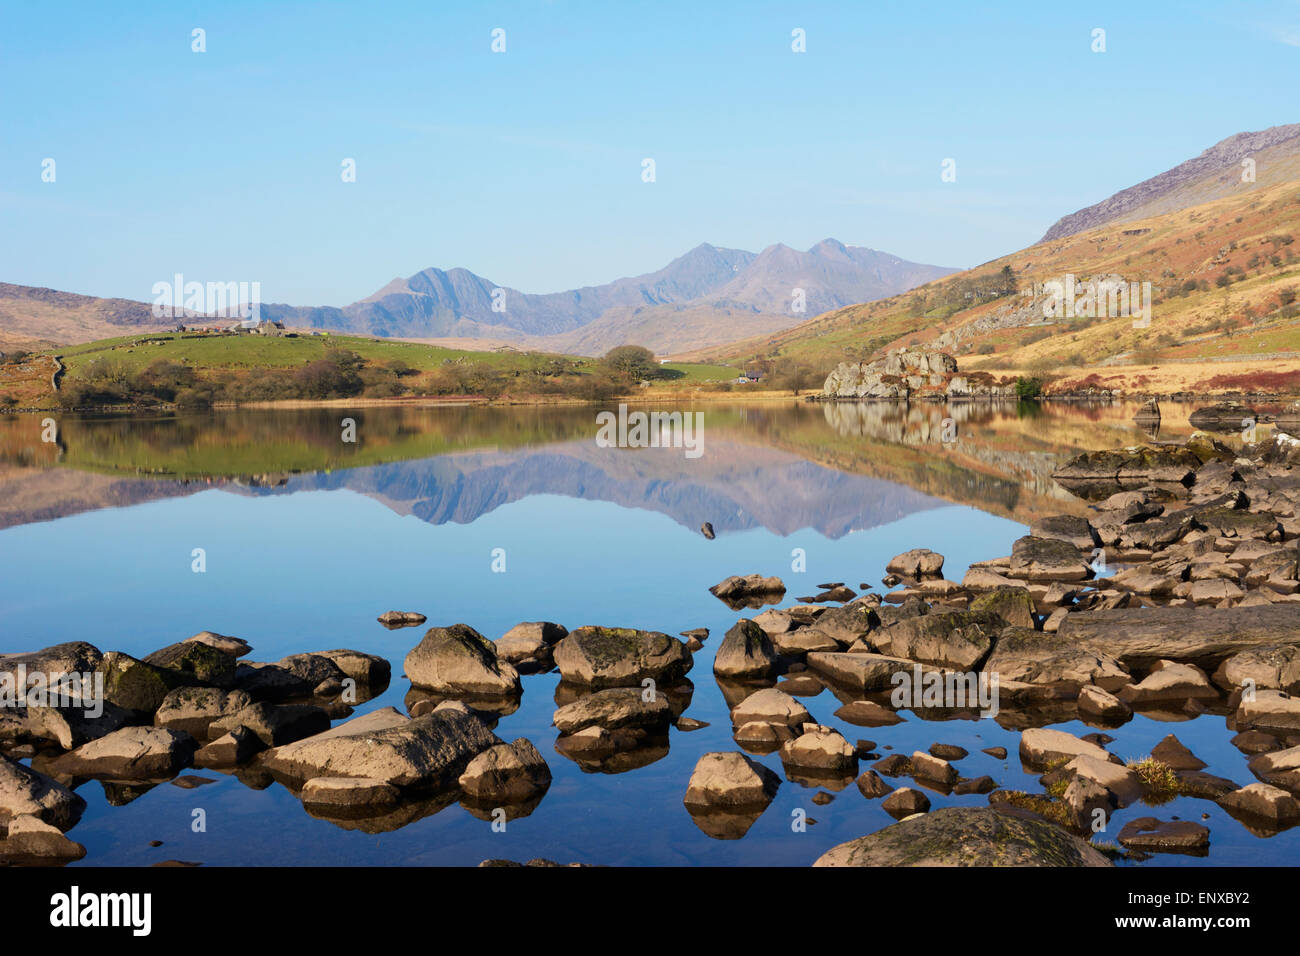 Llynnau Mymbr at Capel Curig in the Snowdonia National Park with Snowdon Horseshoe in the distance. Stock Photo